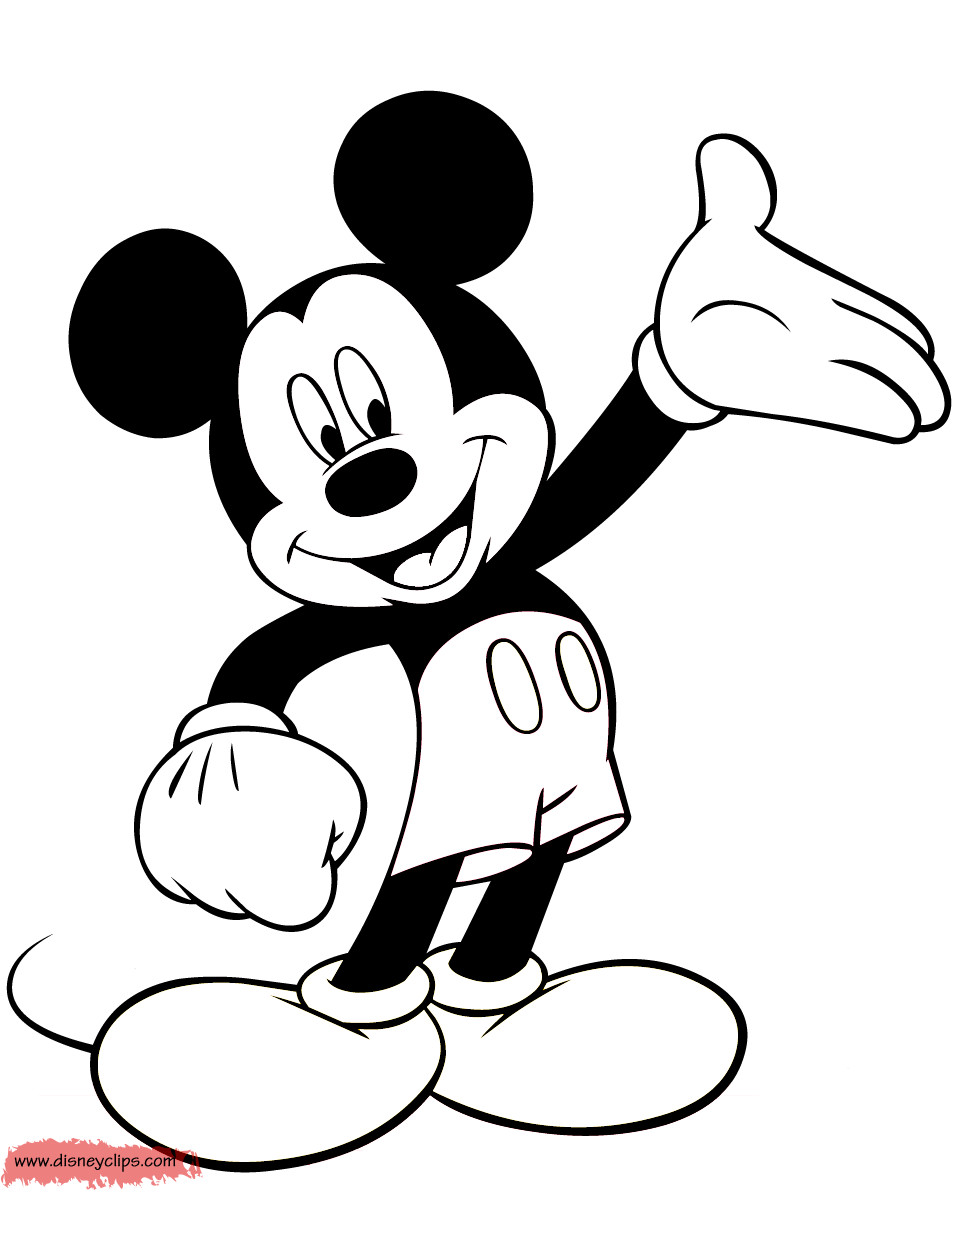 Mickey Mouse Coloring Pages Printable
 Disney Coloring Pages